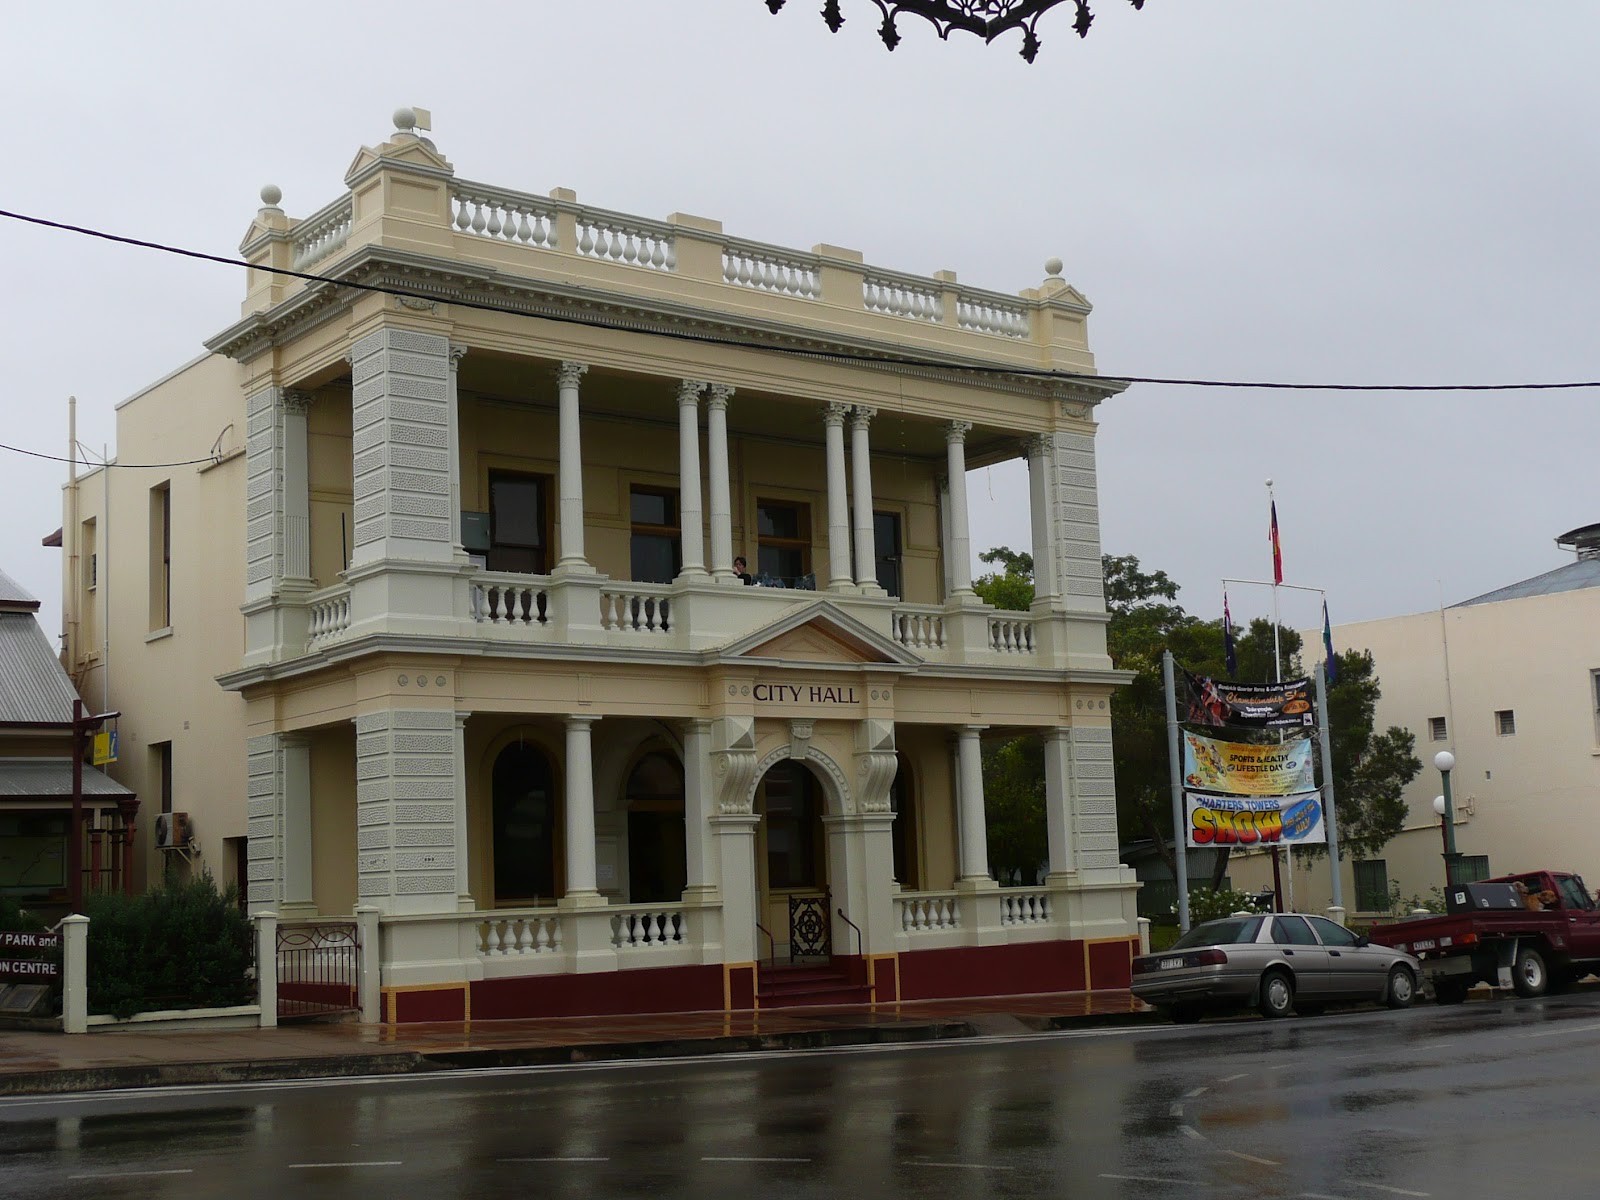 MobileMarshies: CHARTERS TOWERS (7 - 10 JULY)